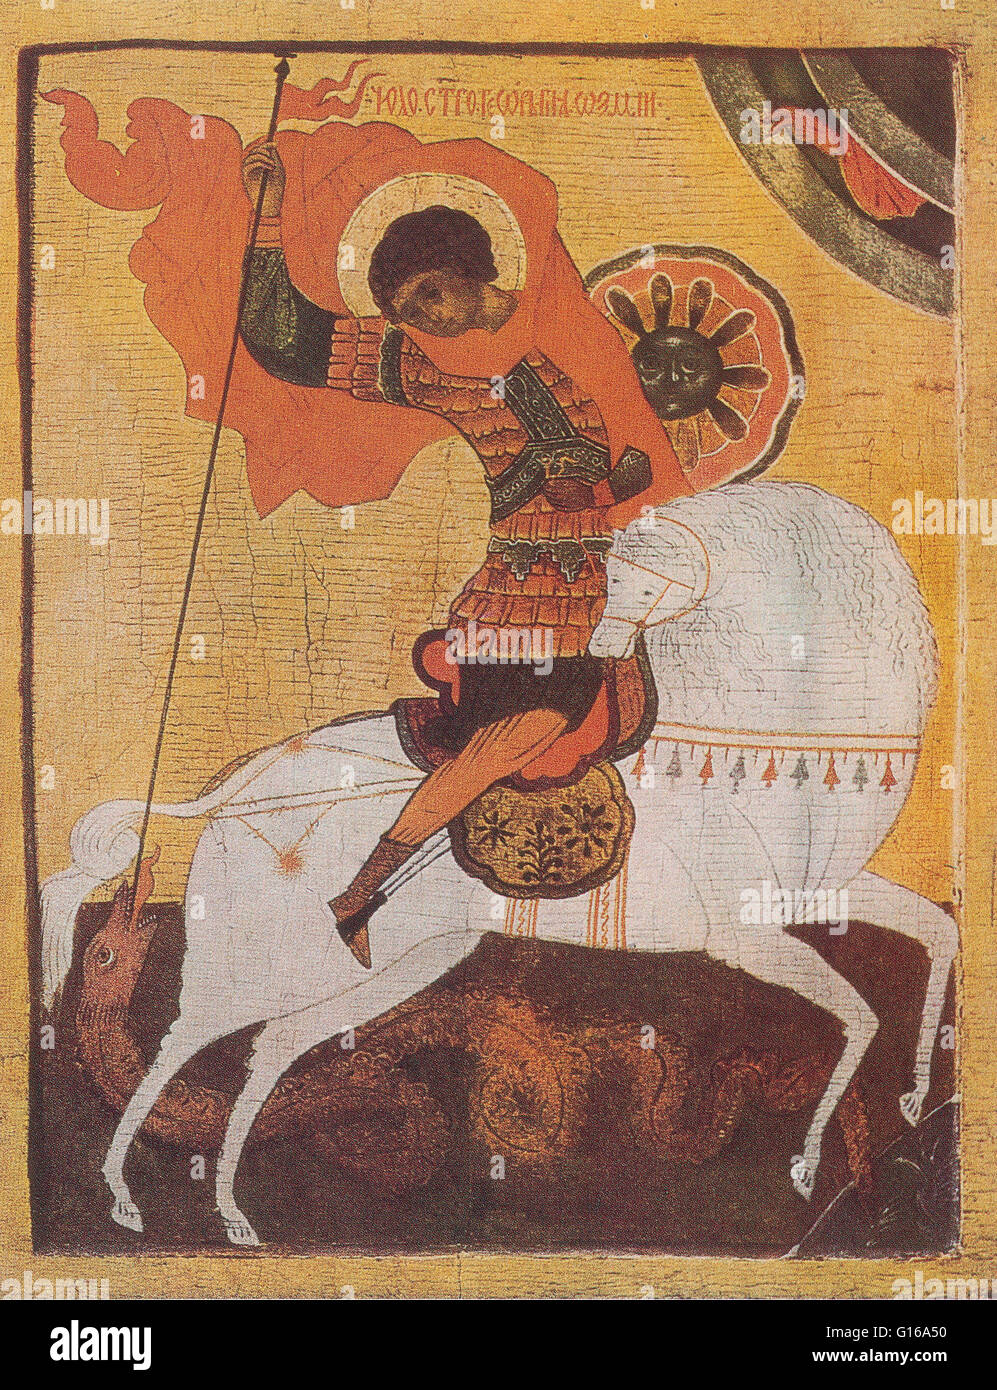 Saint George (275/281 - April 23, 303 AD) was a soldier in the Roman army later venerated as a Christian martyr. He is one of the most venerated saints in the Catholic, Anglican, Eastern Orthodox, and the Oriental Orthodox churches. He is immortalized in Stock Photo